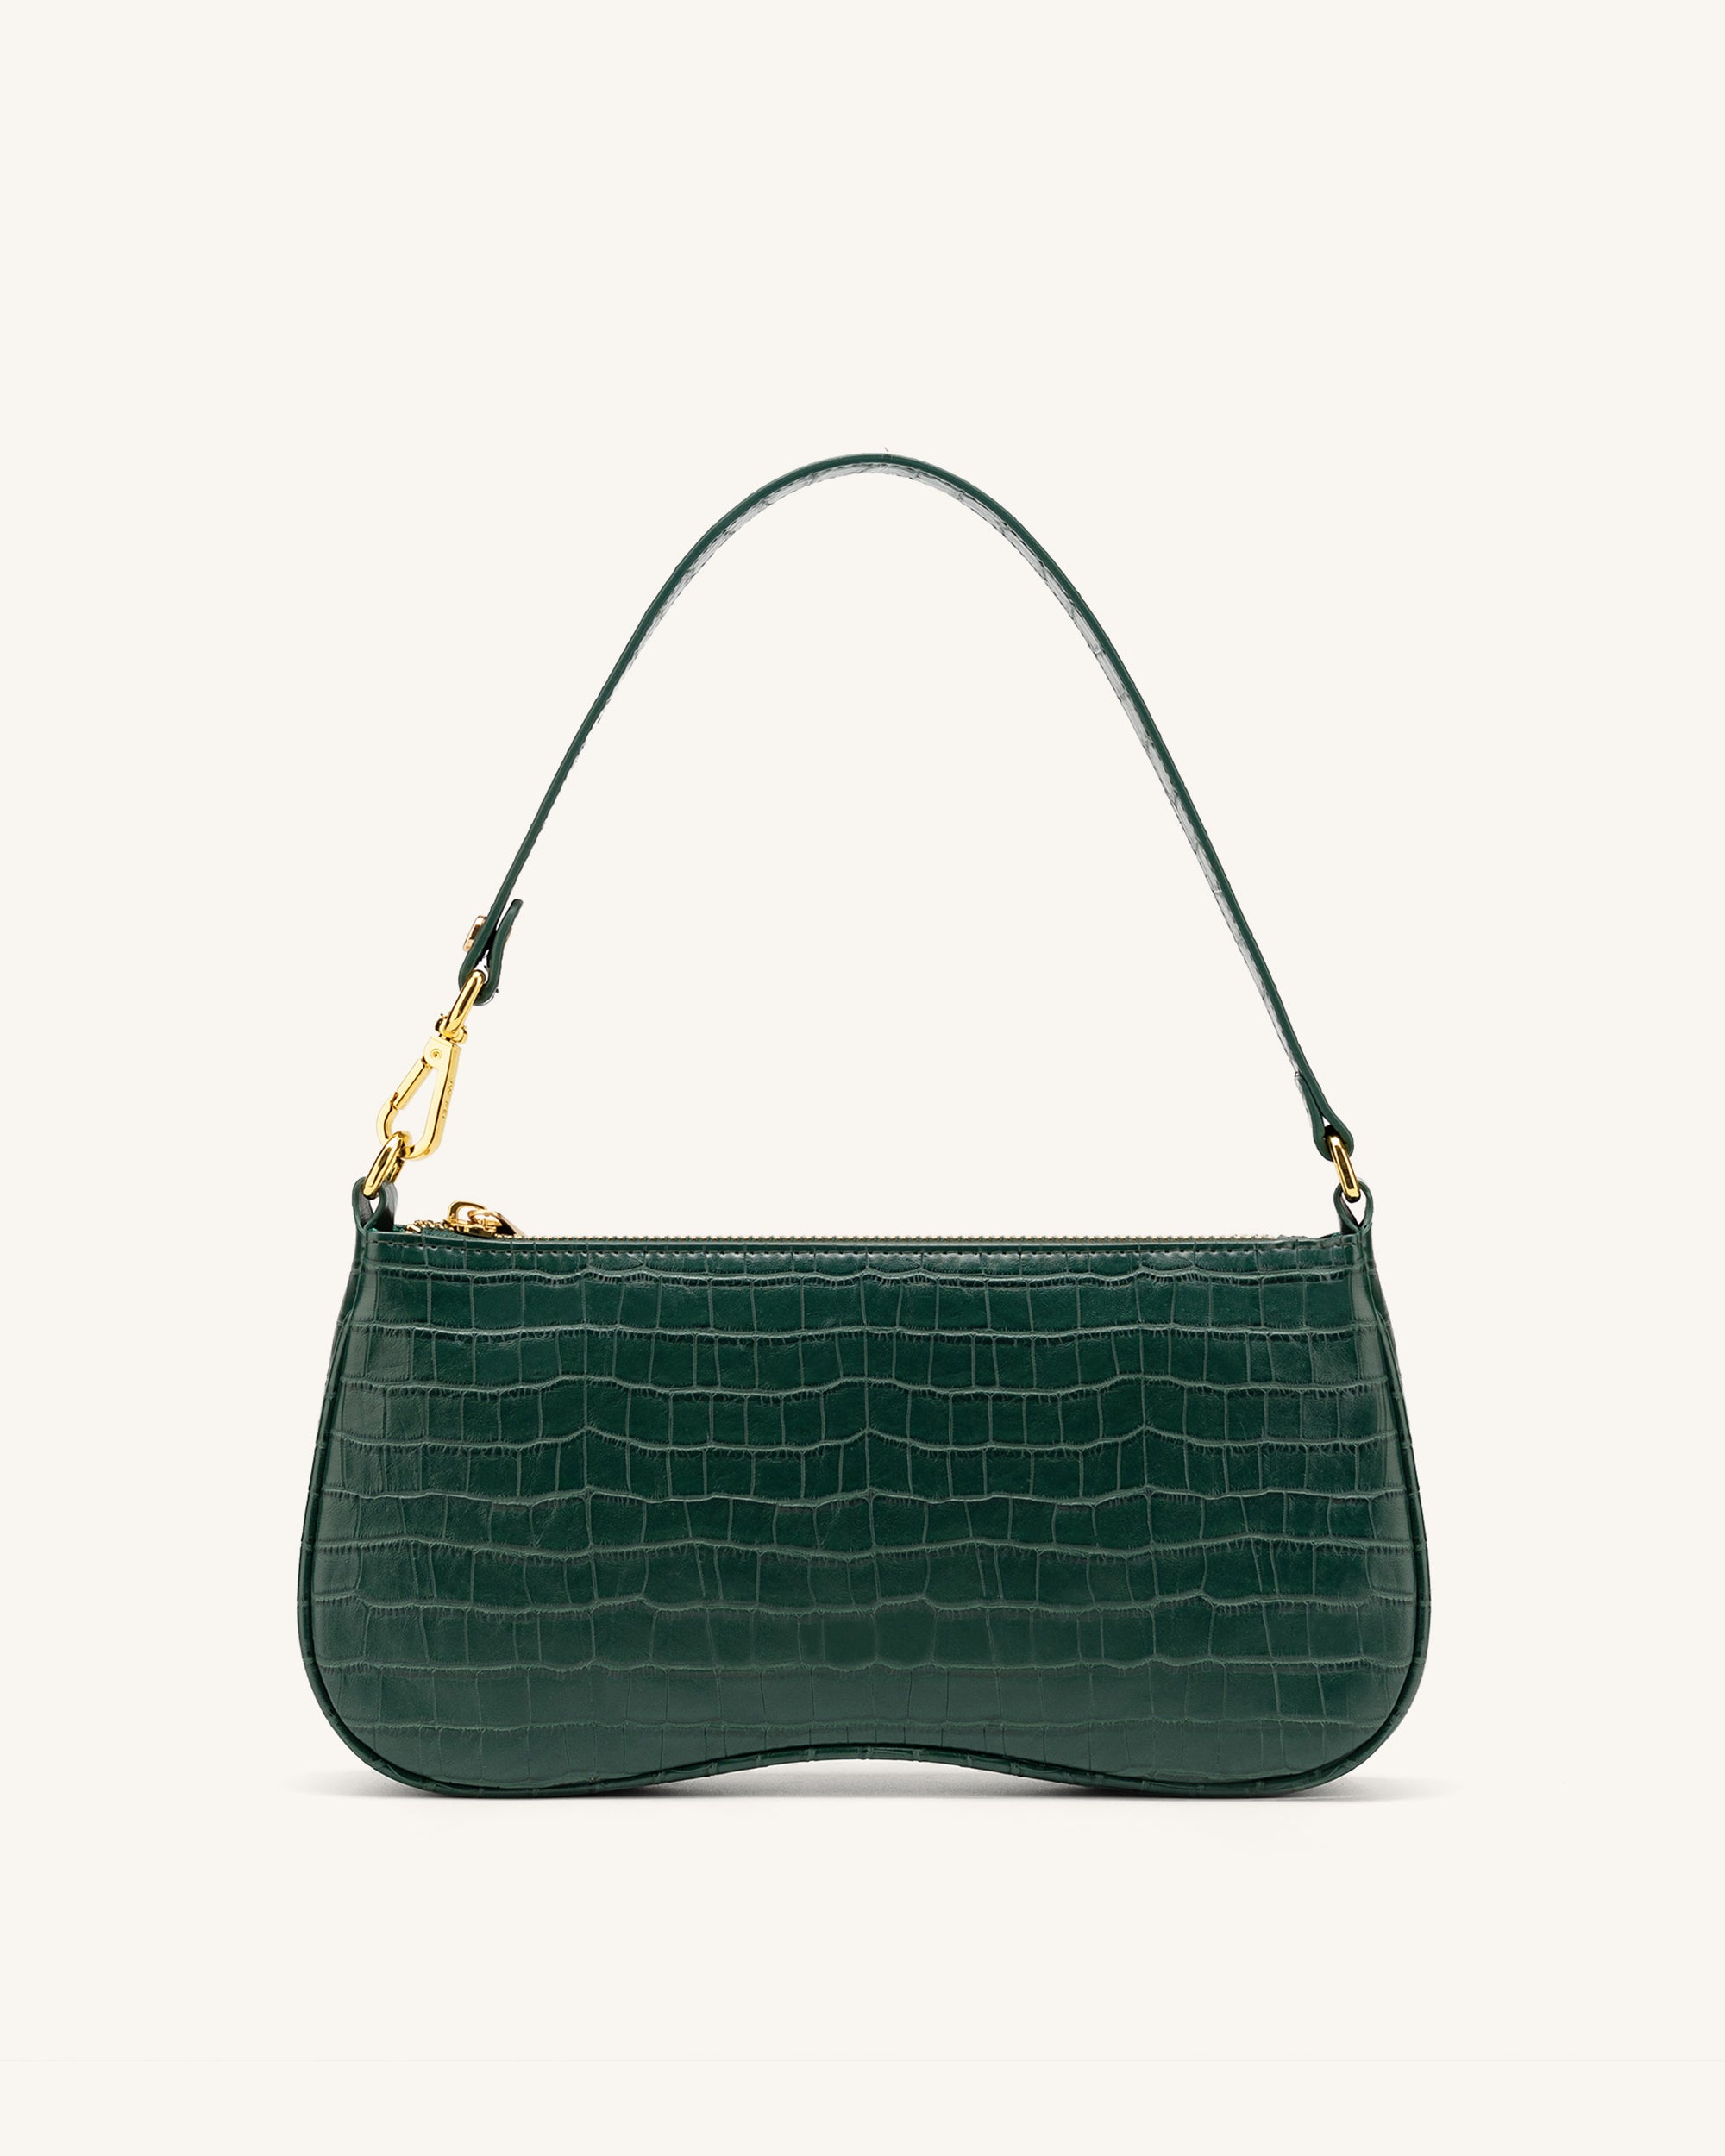 2023 Designer Dark Green Clutch Bag For Men And Women Luxury Wcb Handbag  With Double Letter Mark, Red Green Webbing Purse, High Quality Fashion  Marmont Jackie1961 Makeup Bag From Vvfashionbag, $34.52 | DHgate.Com